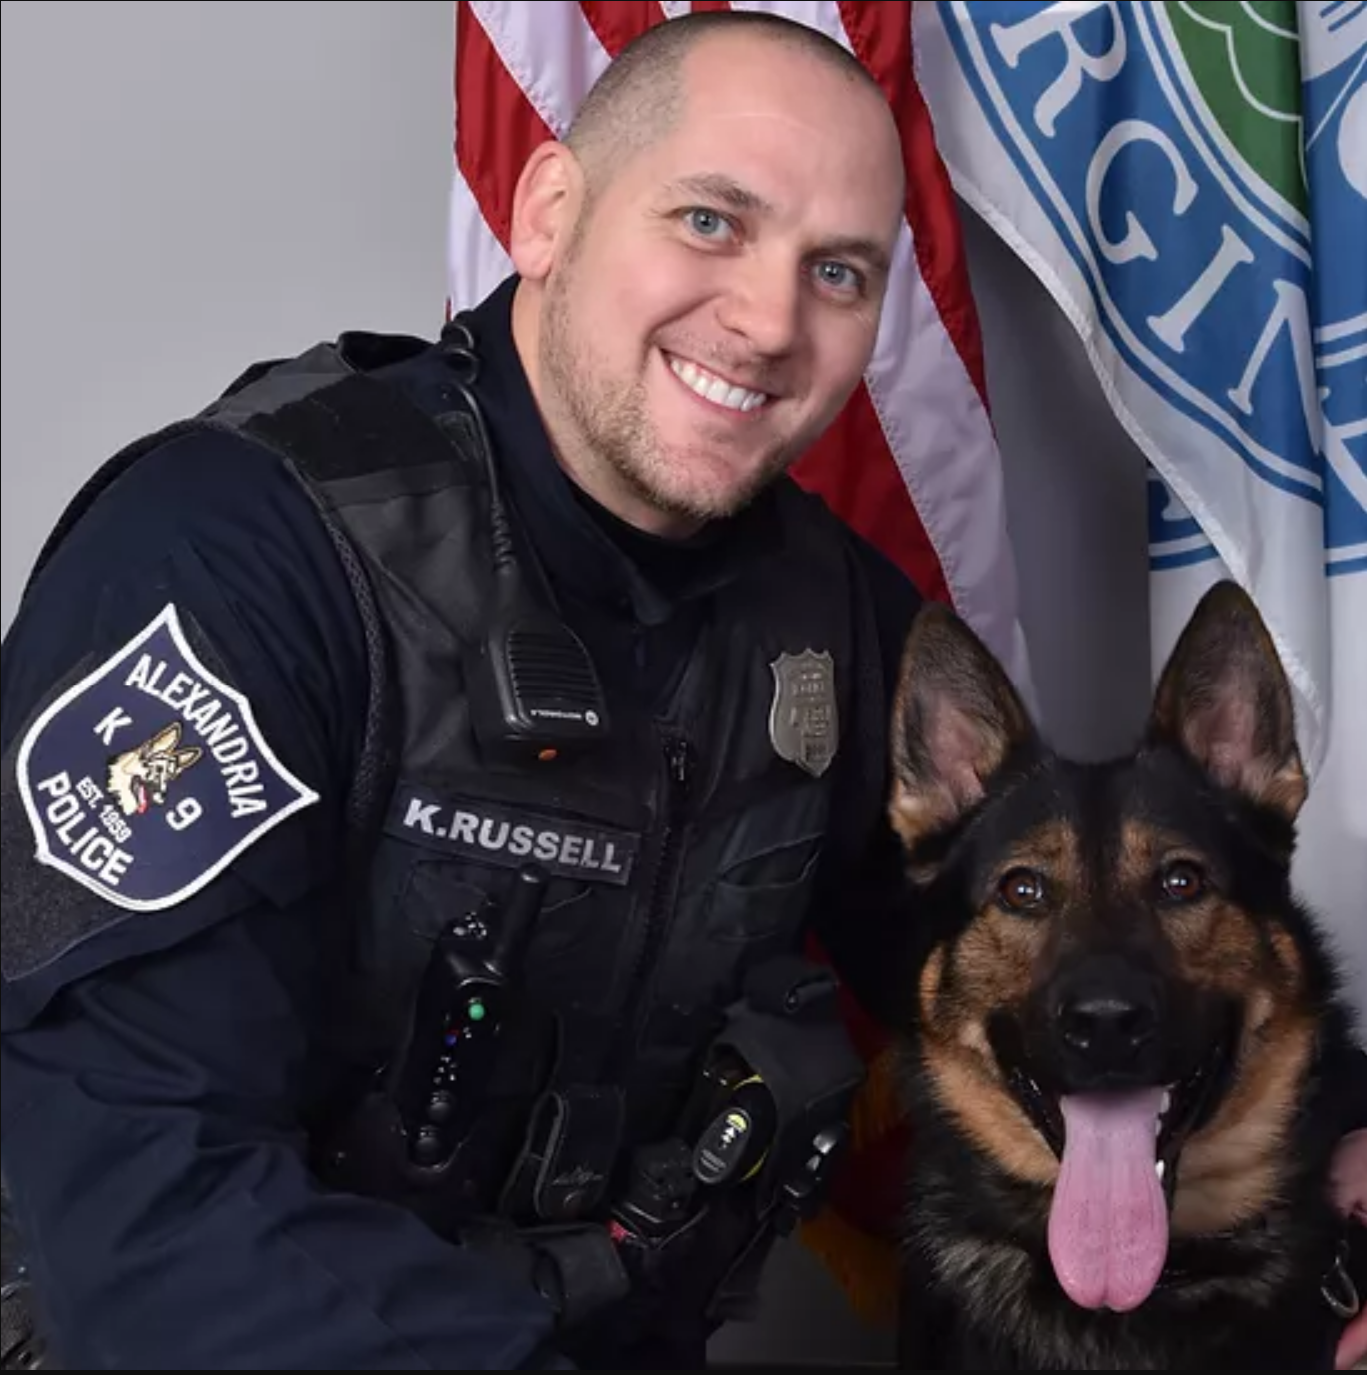 Russell (in uniform) and a canine officer